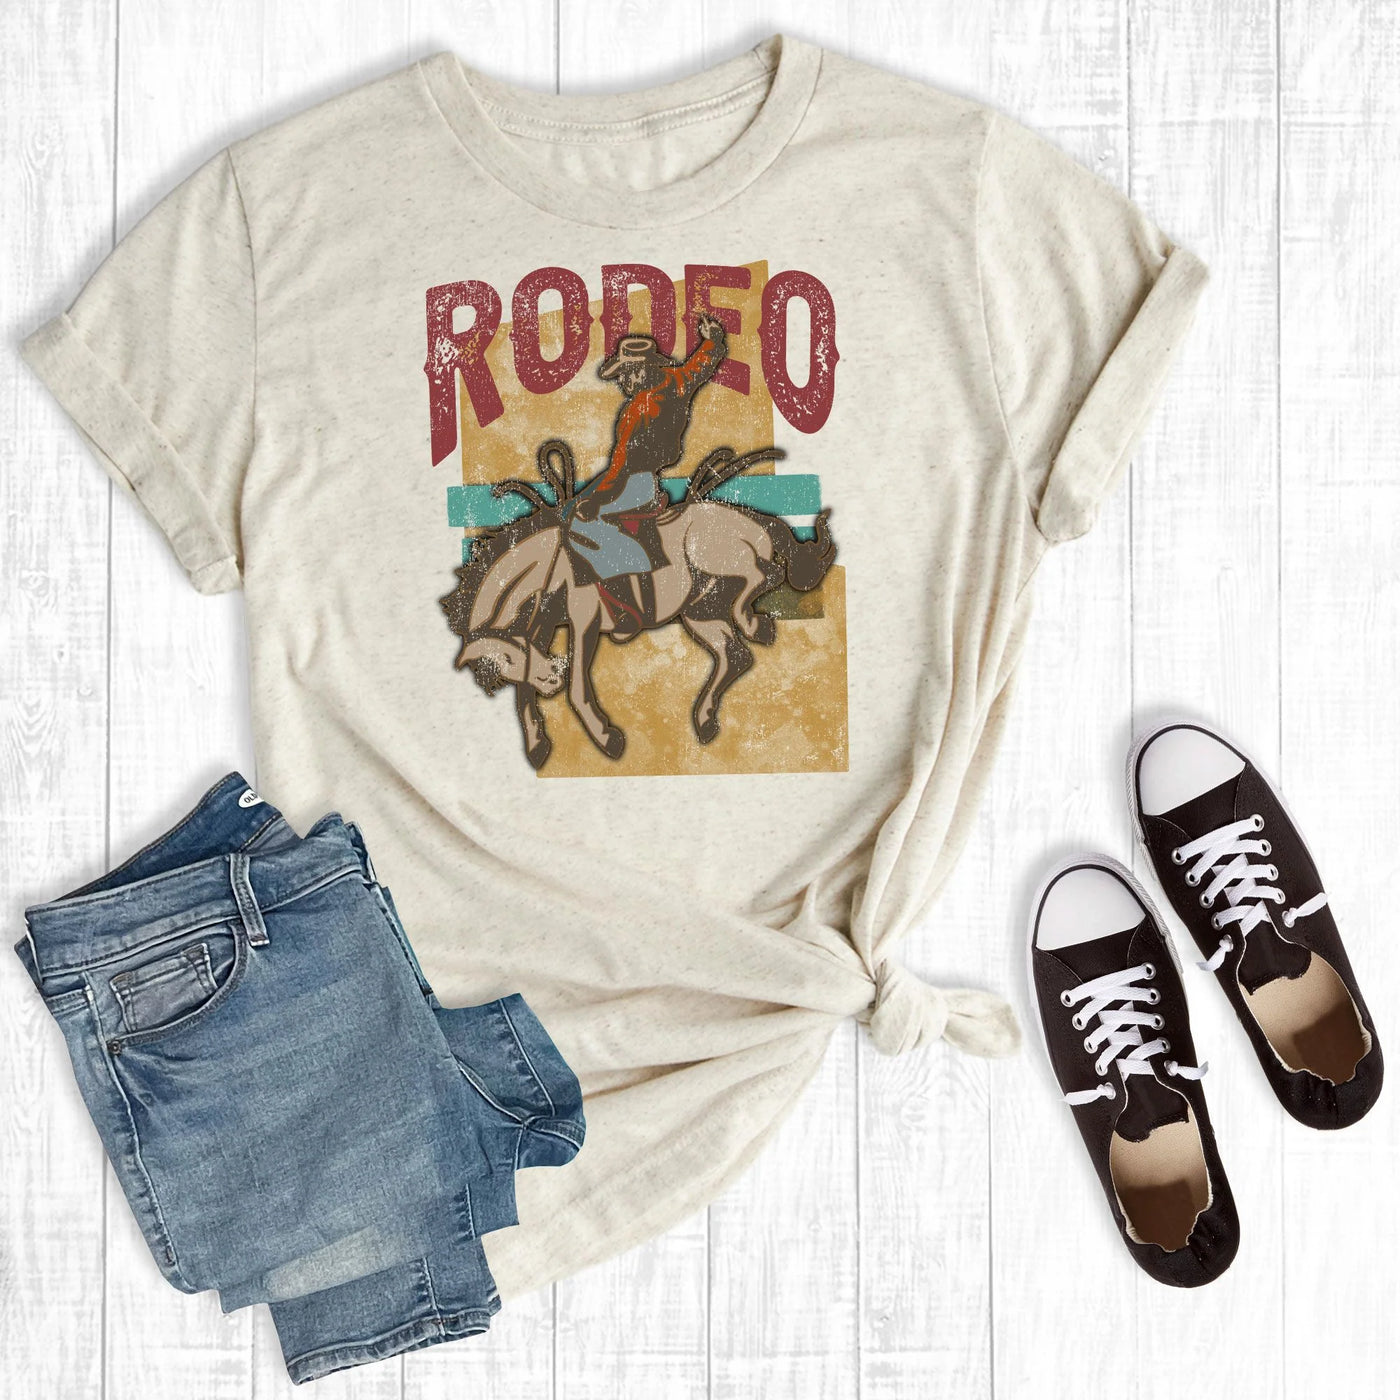 Rodeo Tee in a size large